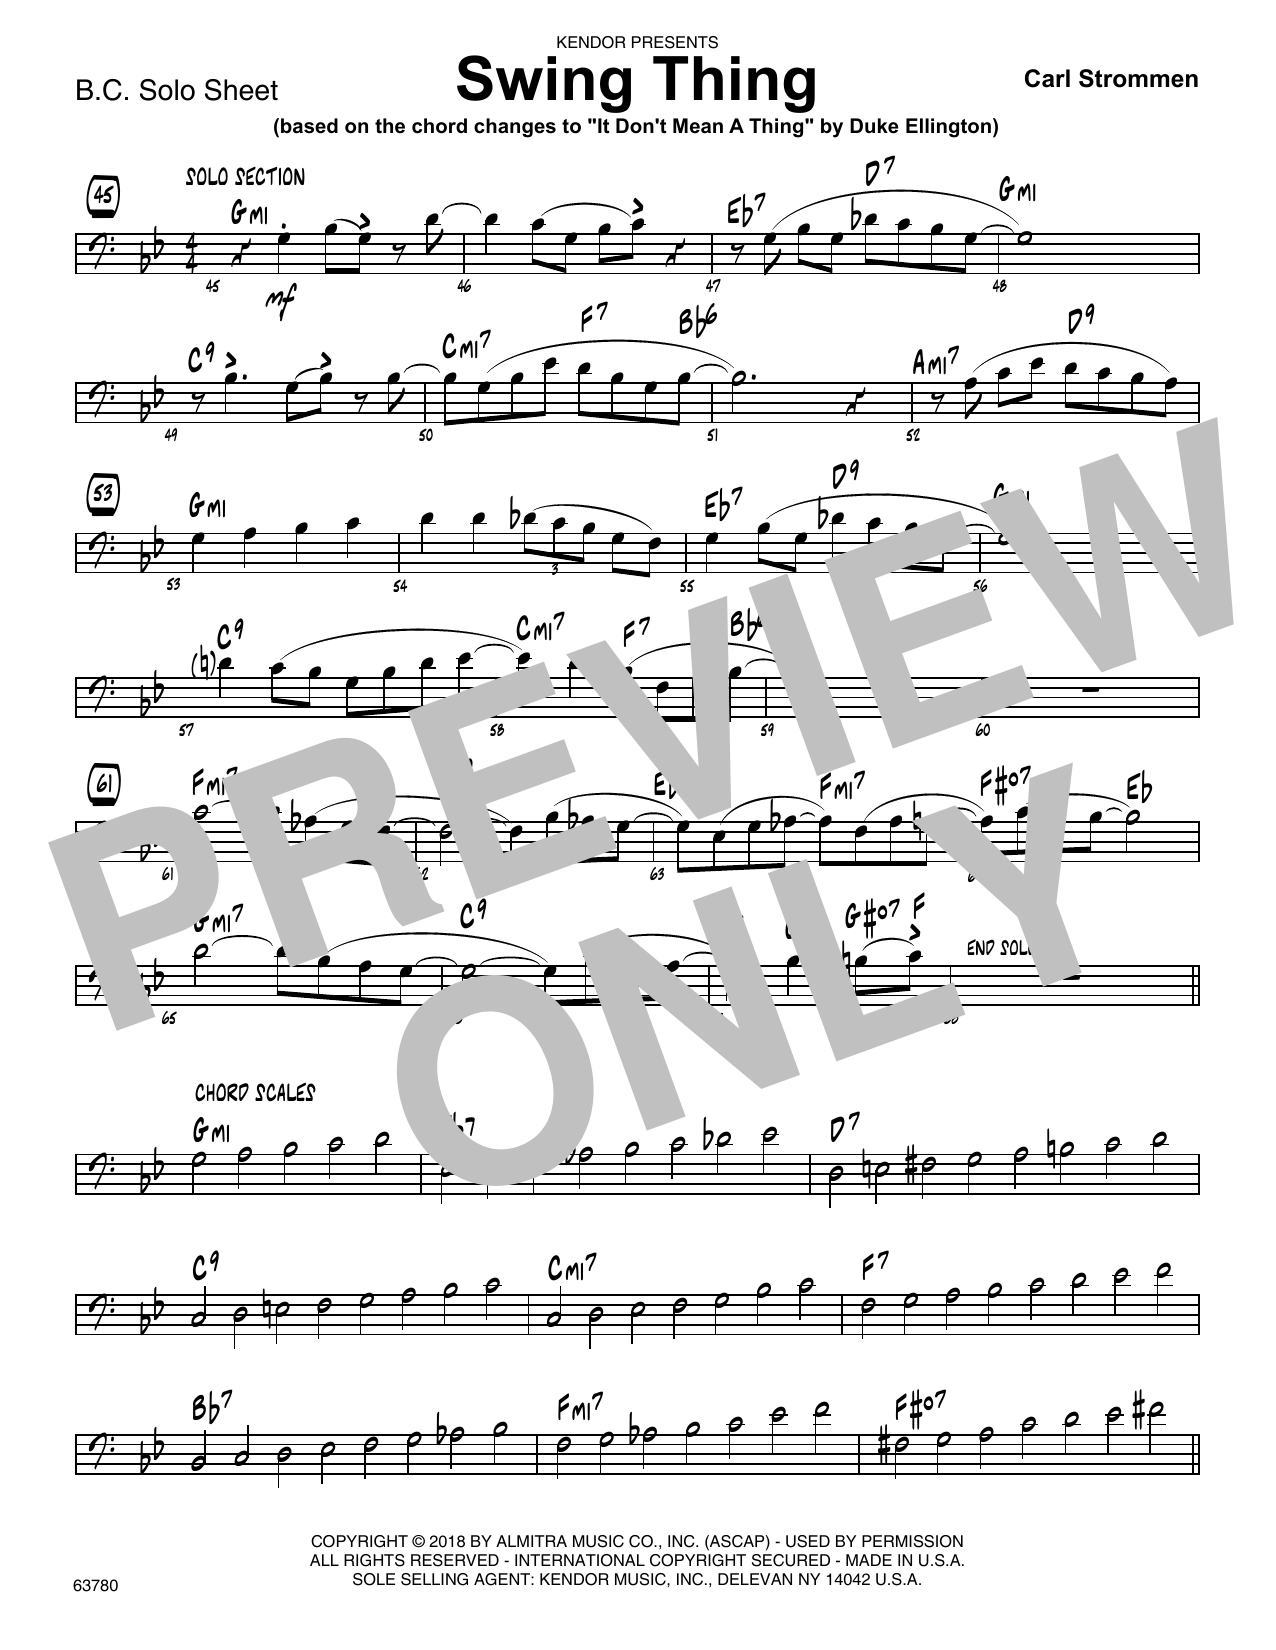 Download Carl Strommen Swing Thing - Sample Solo - Bass Clef I Sheet Music